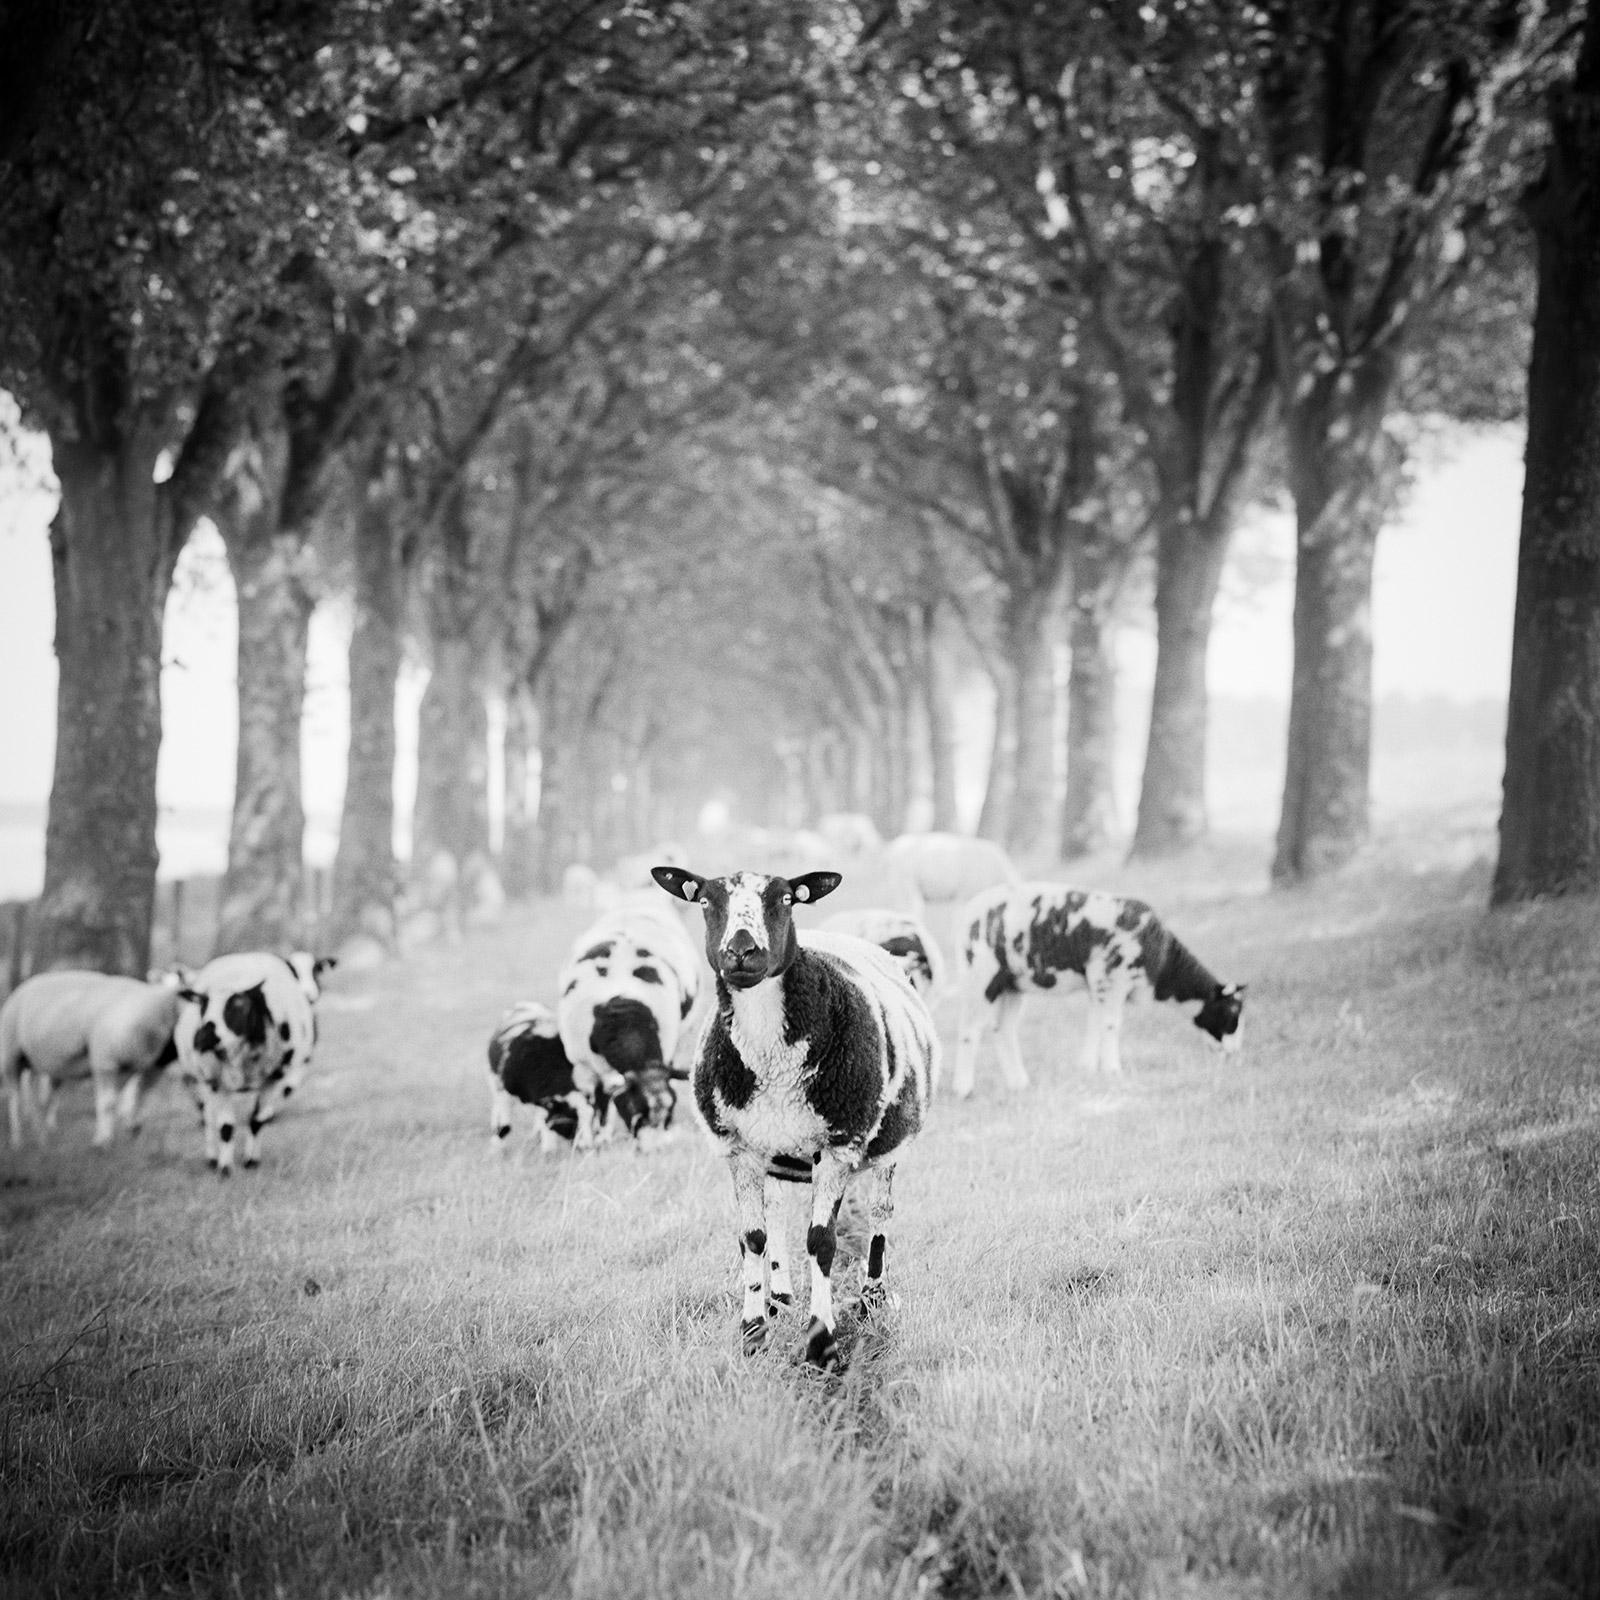 Shaun the Sheep, Tree Avenue contemporary black and white landscape photography